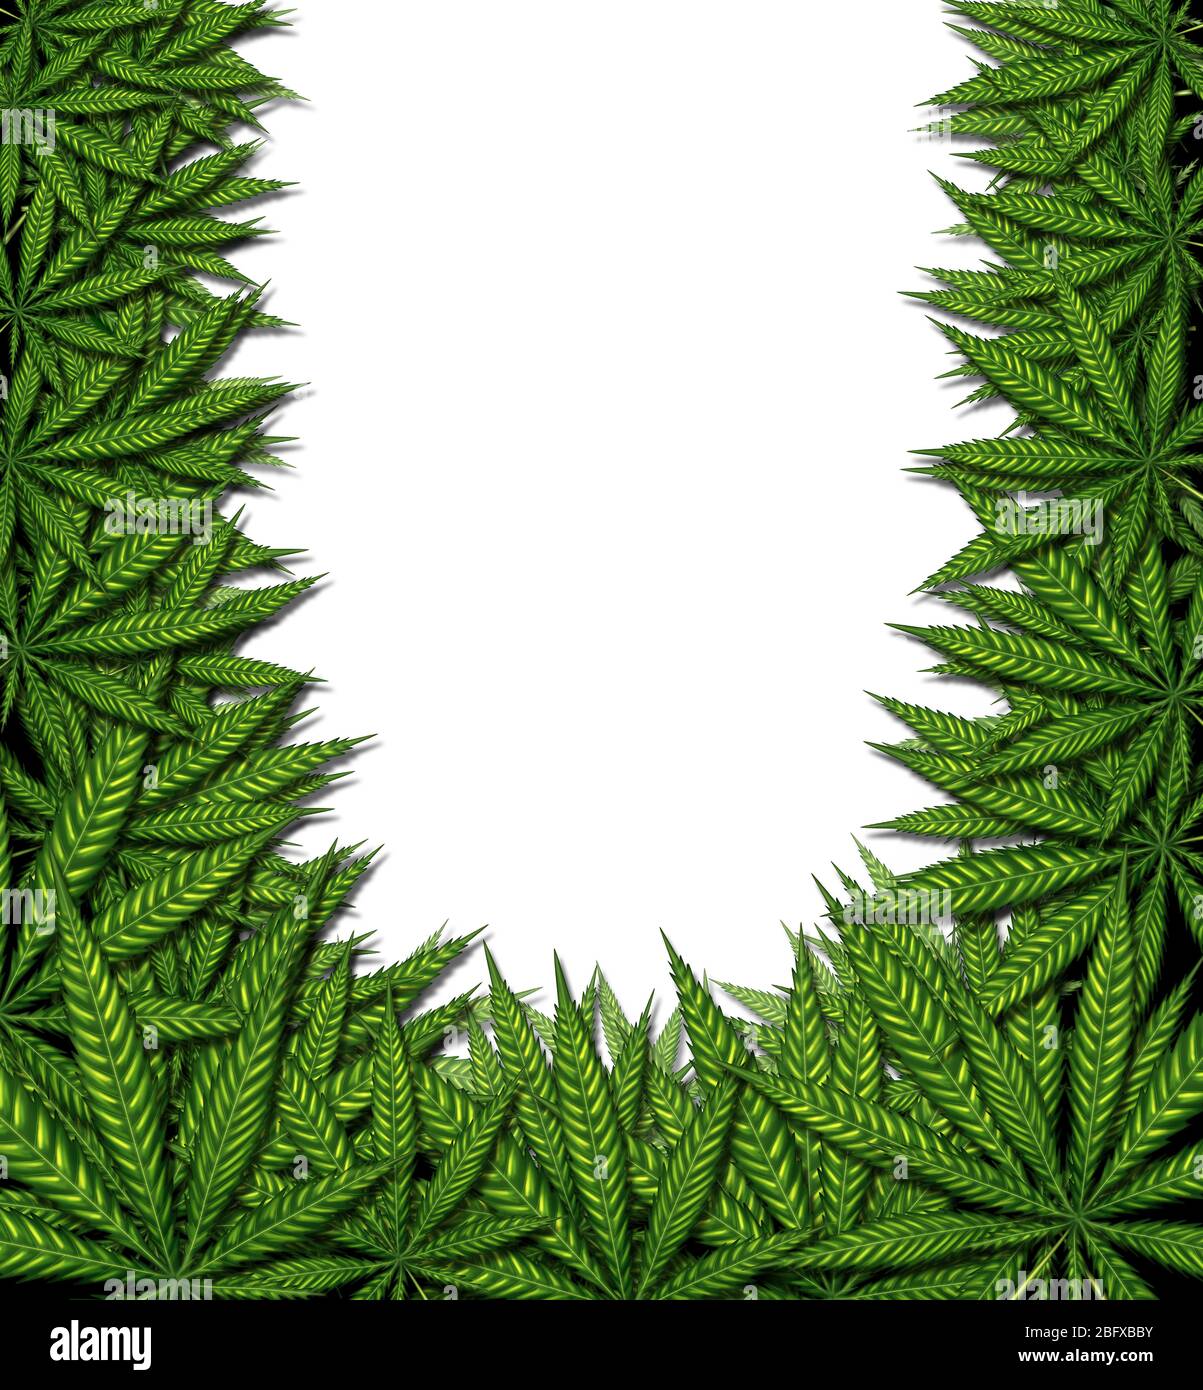 Marijuana background frame and cannabis border design on a white background as a symbol for medicinal pot or medical weed as a group of green leaves i Stock Photo